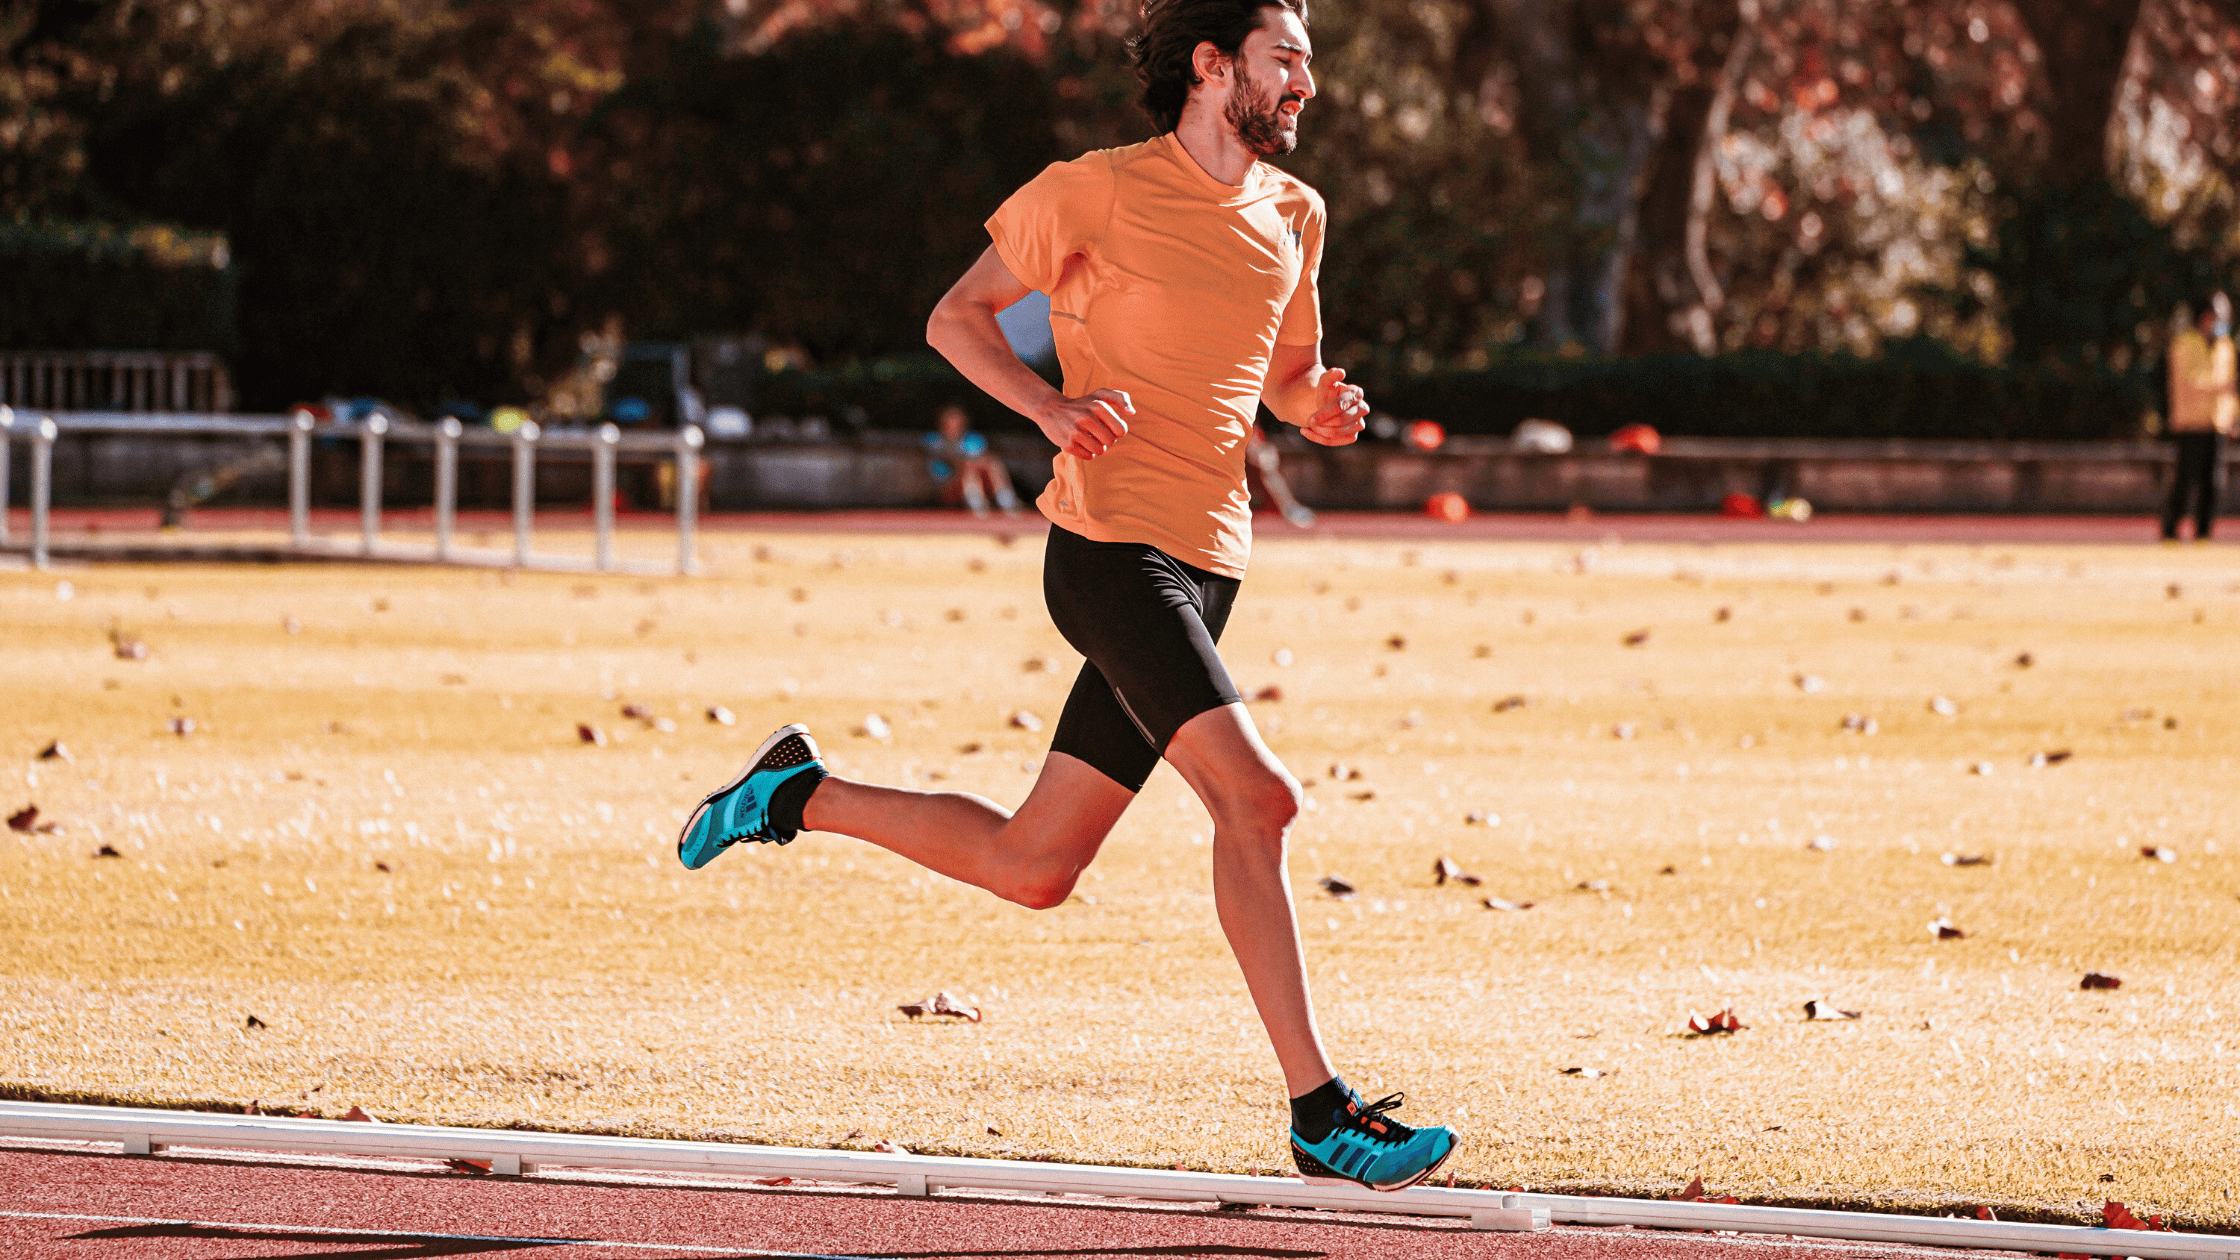 How to Run Faster Without Overtraining: Six Tips To Increase Speed